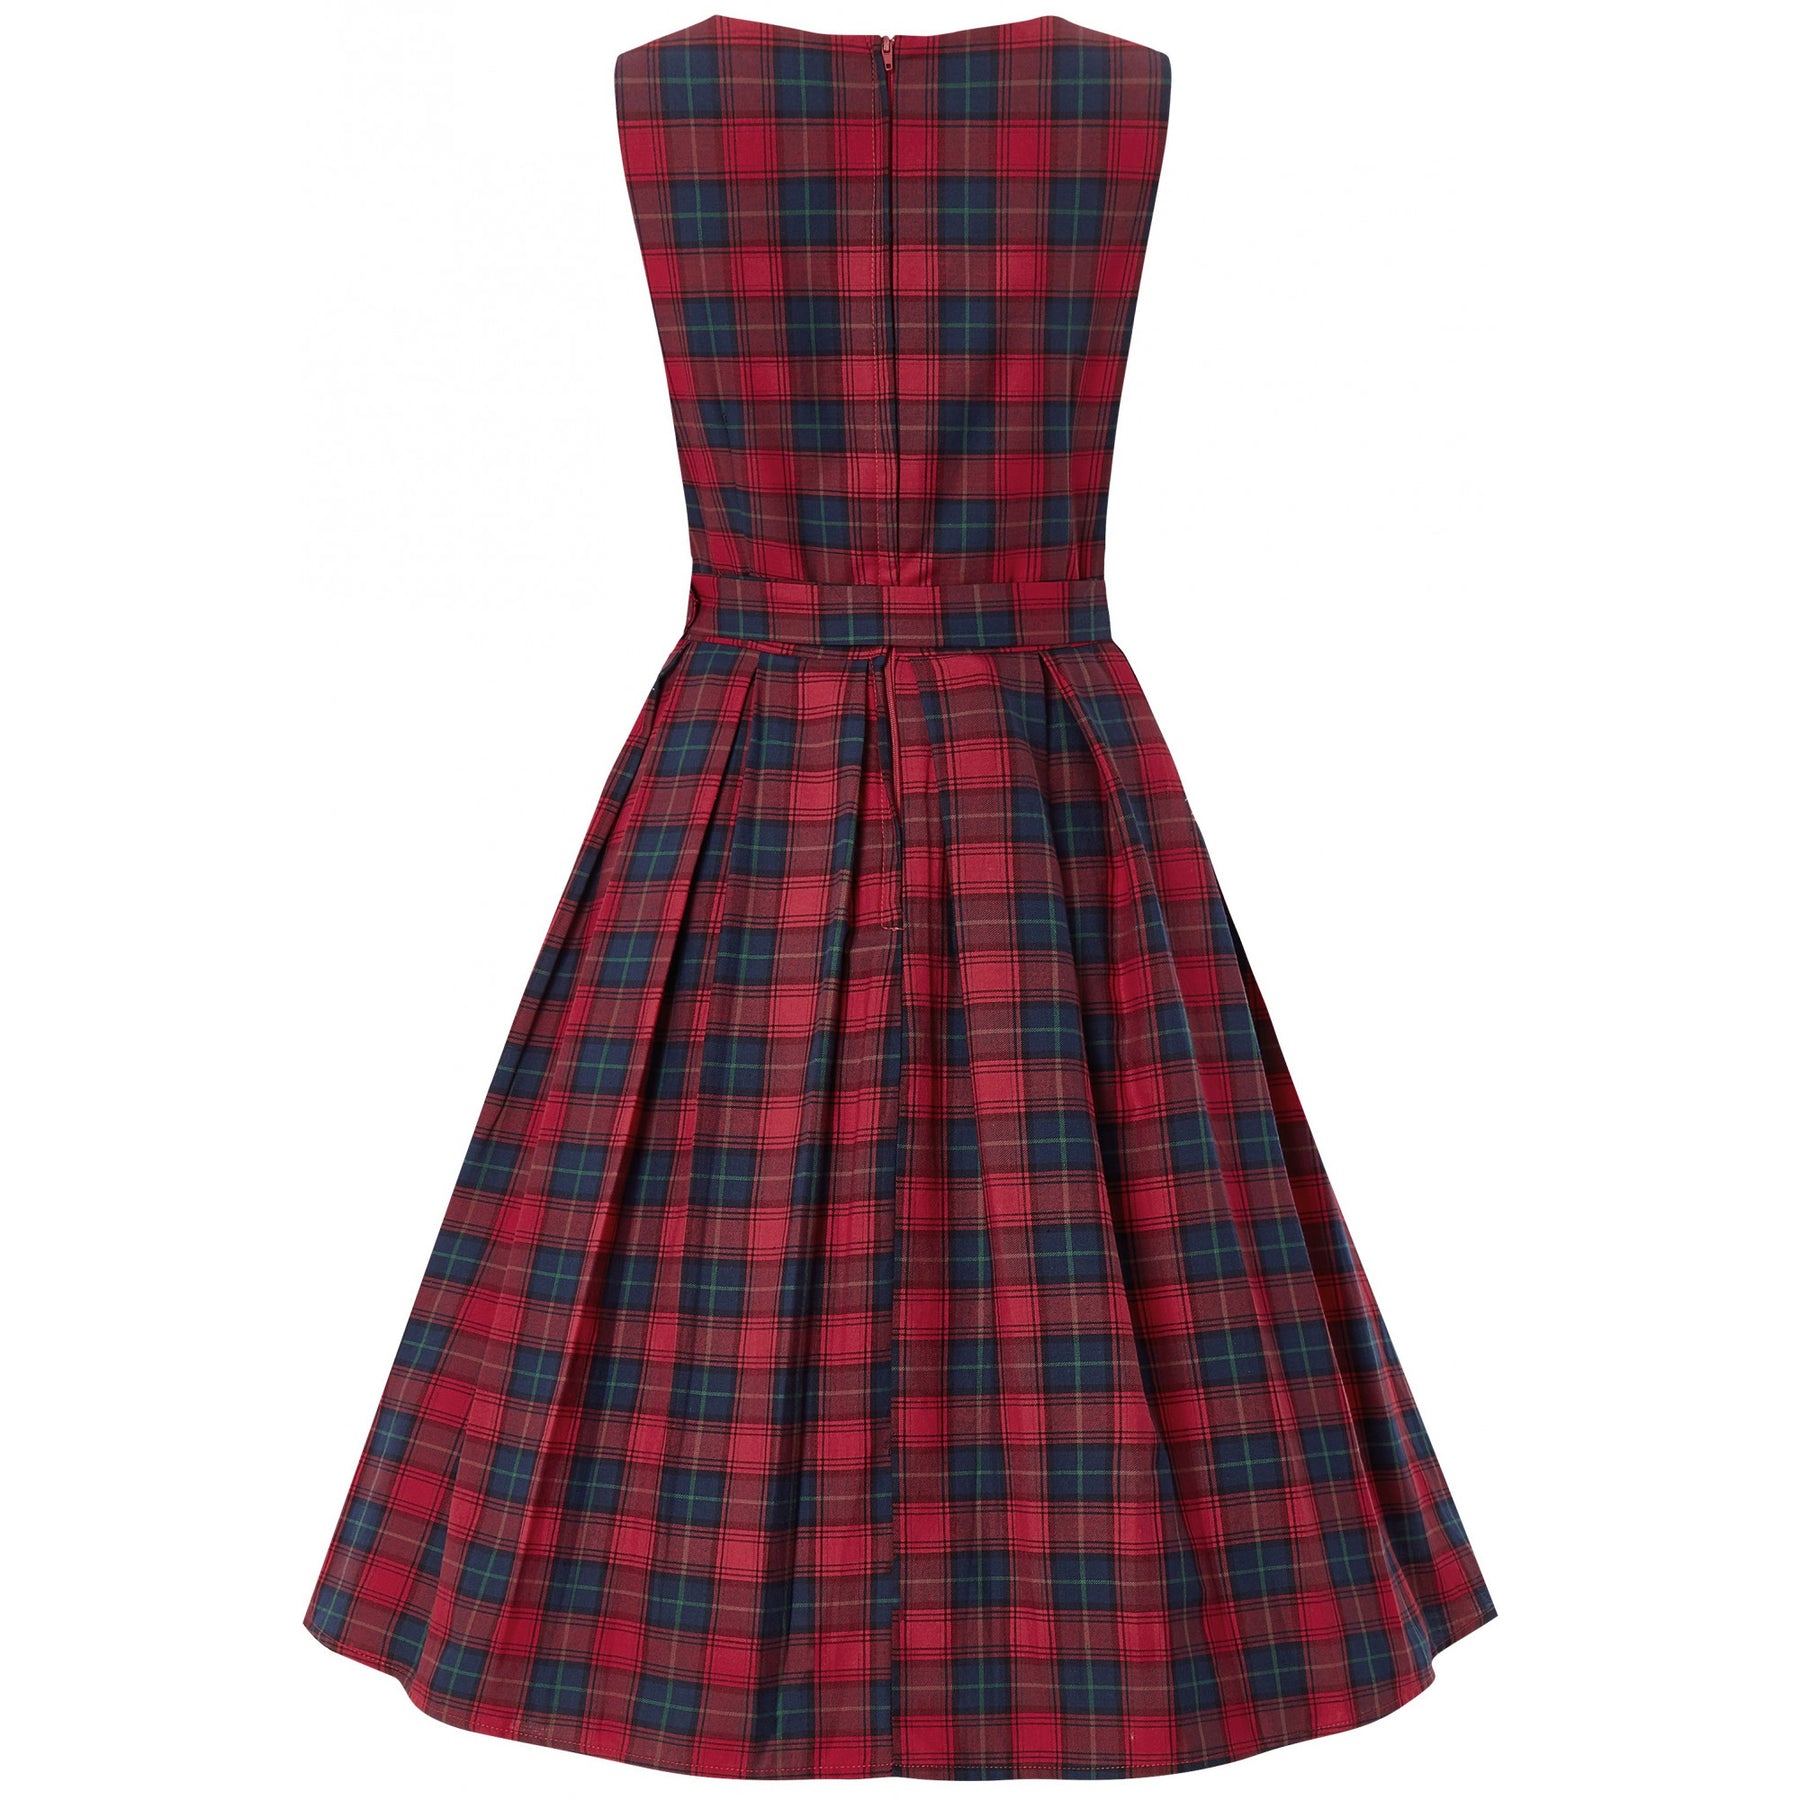 Retro Check Swing Dress in Red/Blue